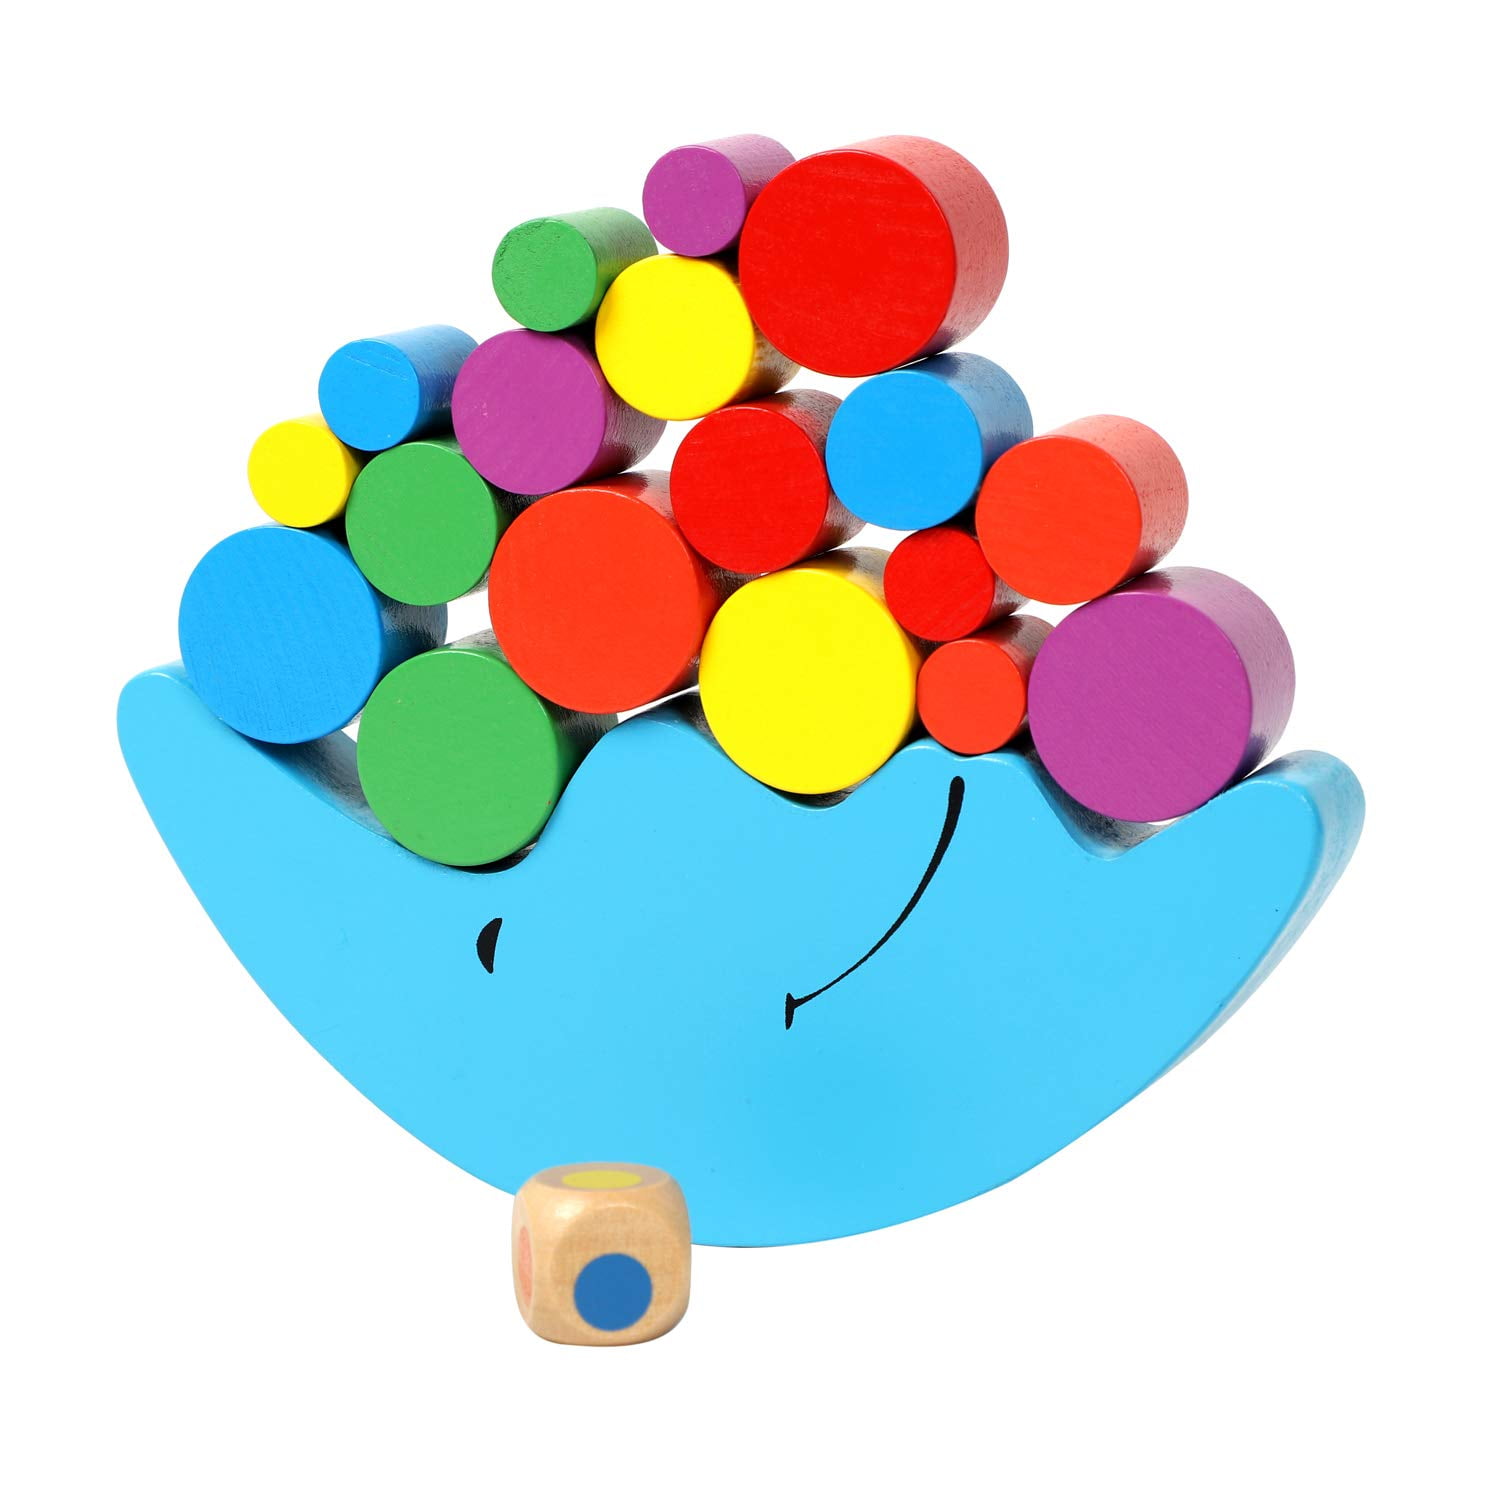 Sorting Toy Balancing Moon Stacking Wooden Toy for 3 Years Old Suitable for Montessori Learning Toys of Wood Oxford Wooden Stacking Blocks Balancing Game